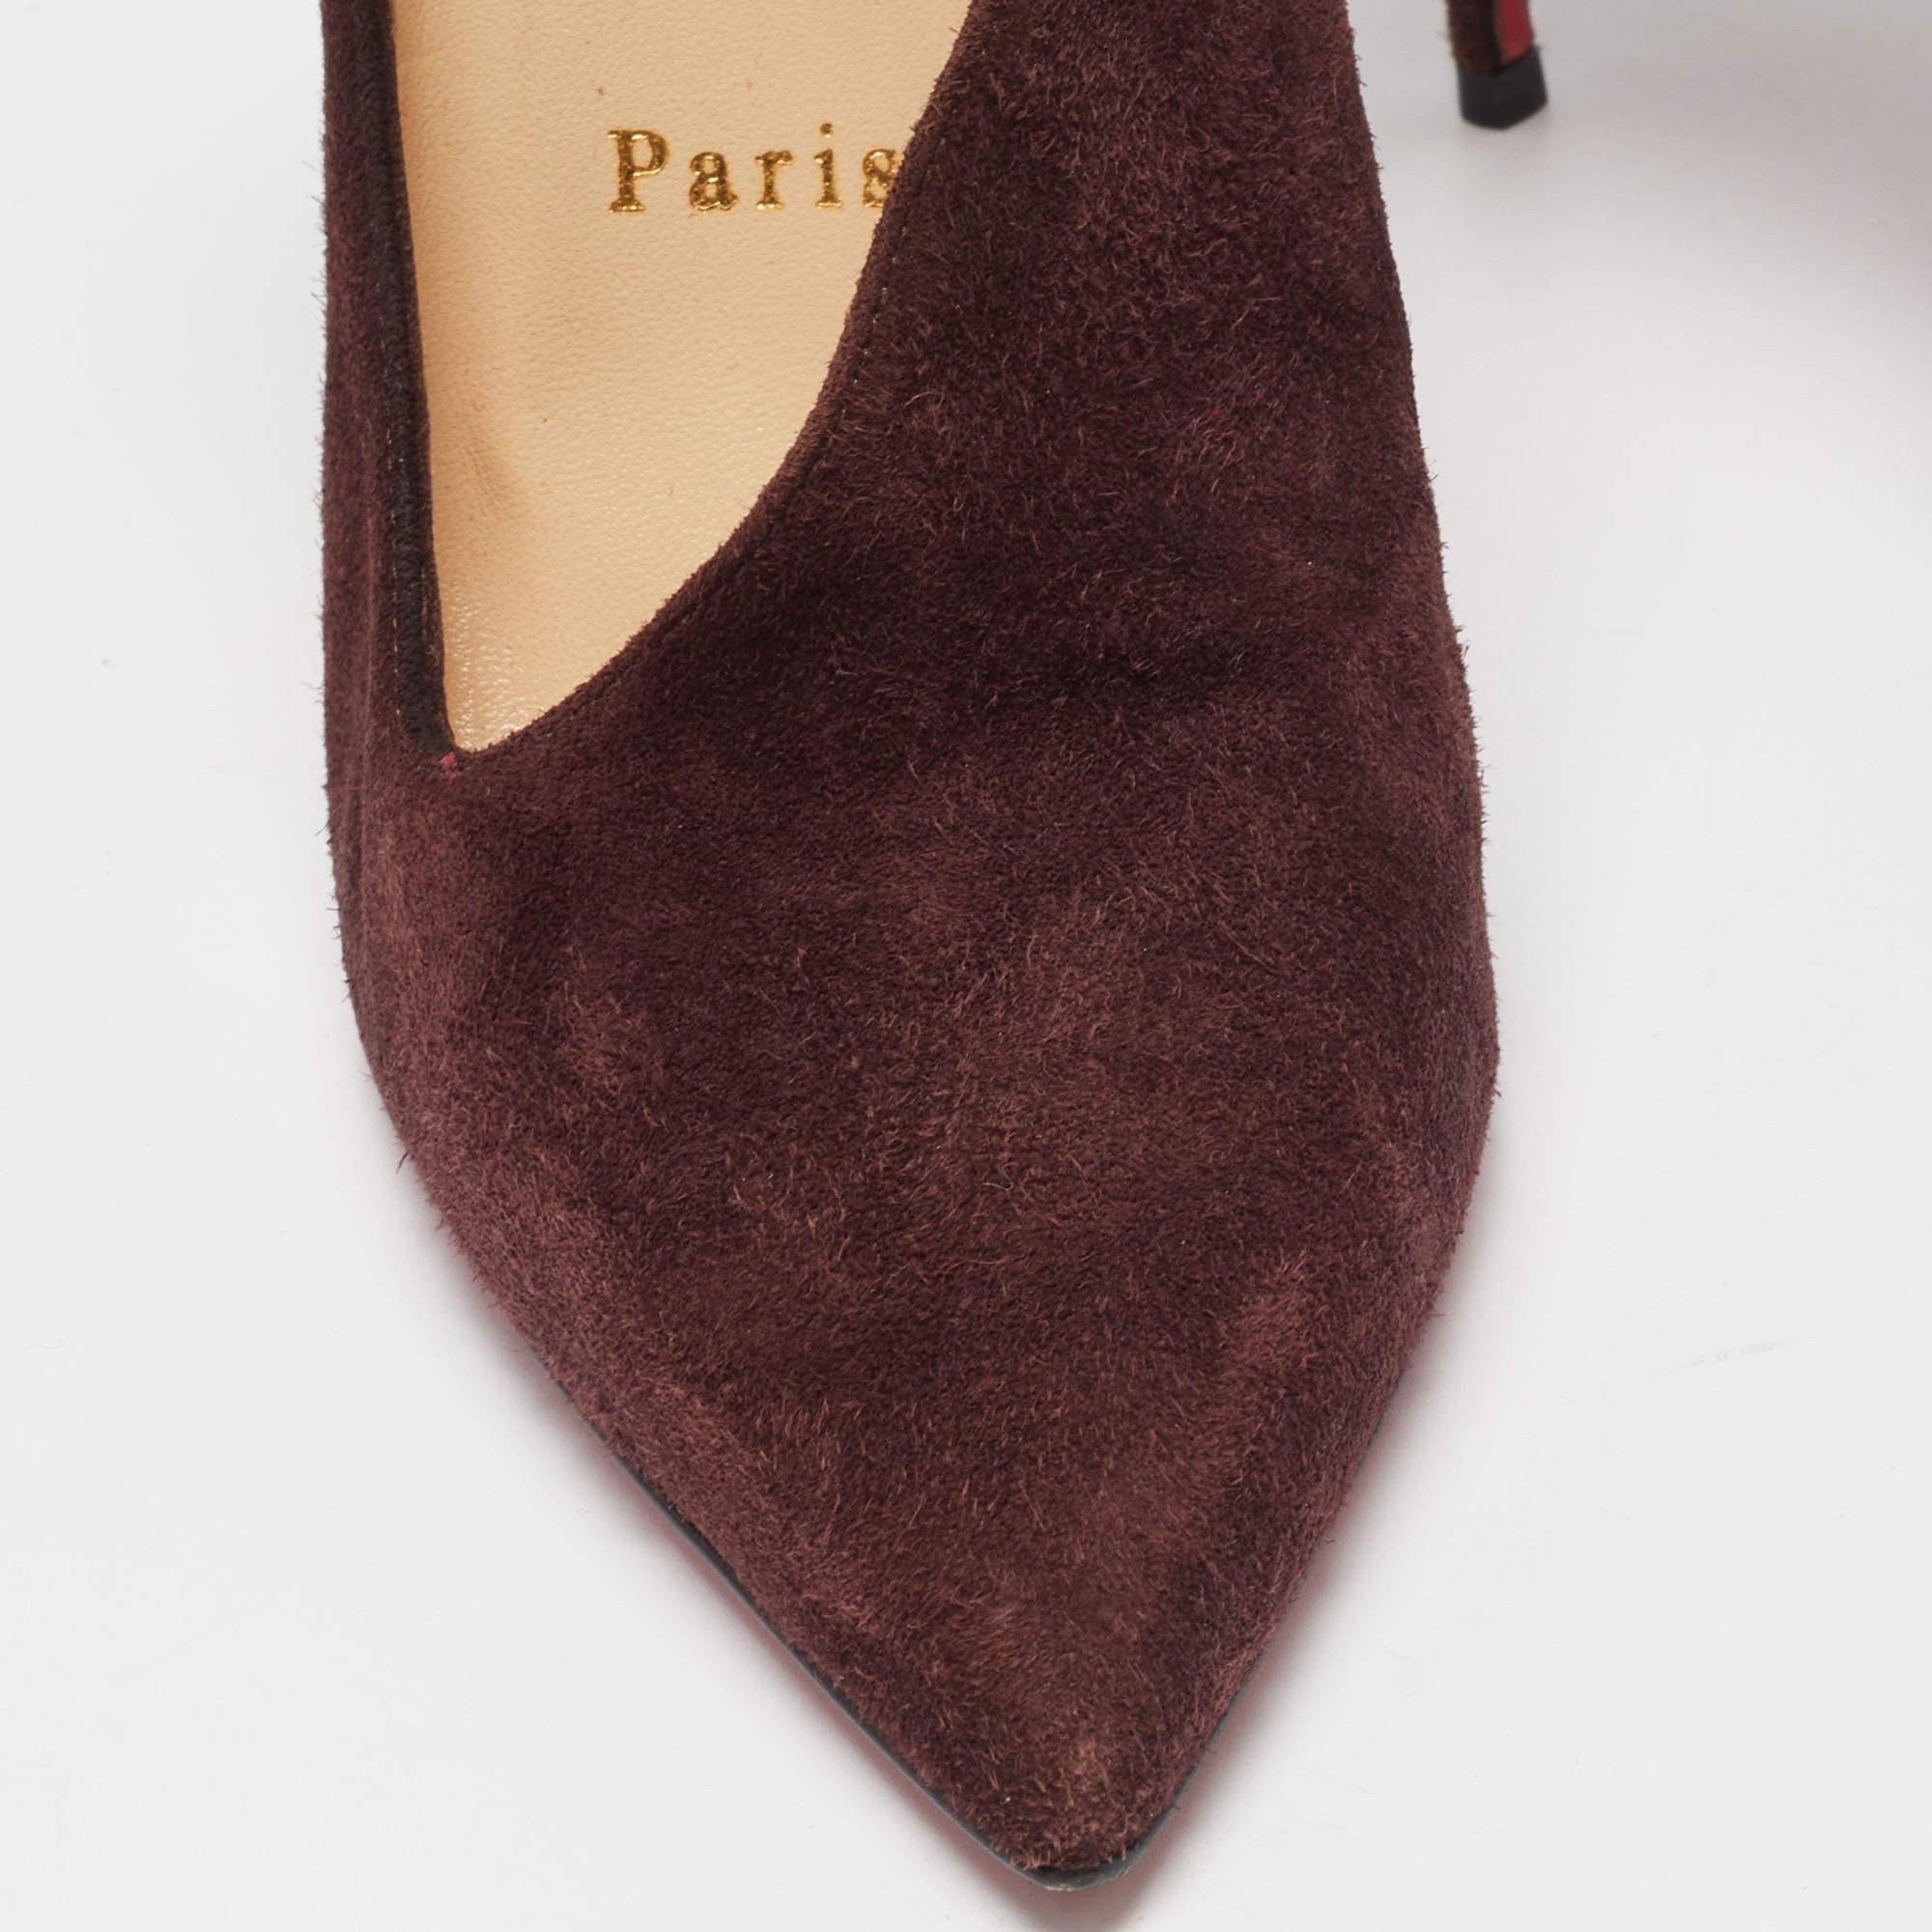 Christian Louboutin Dark Burgundy Suede Vampydoly Pumps Size 36 For Sale 2